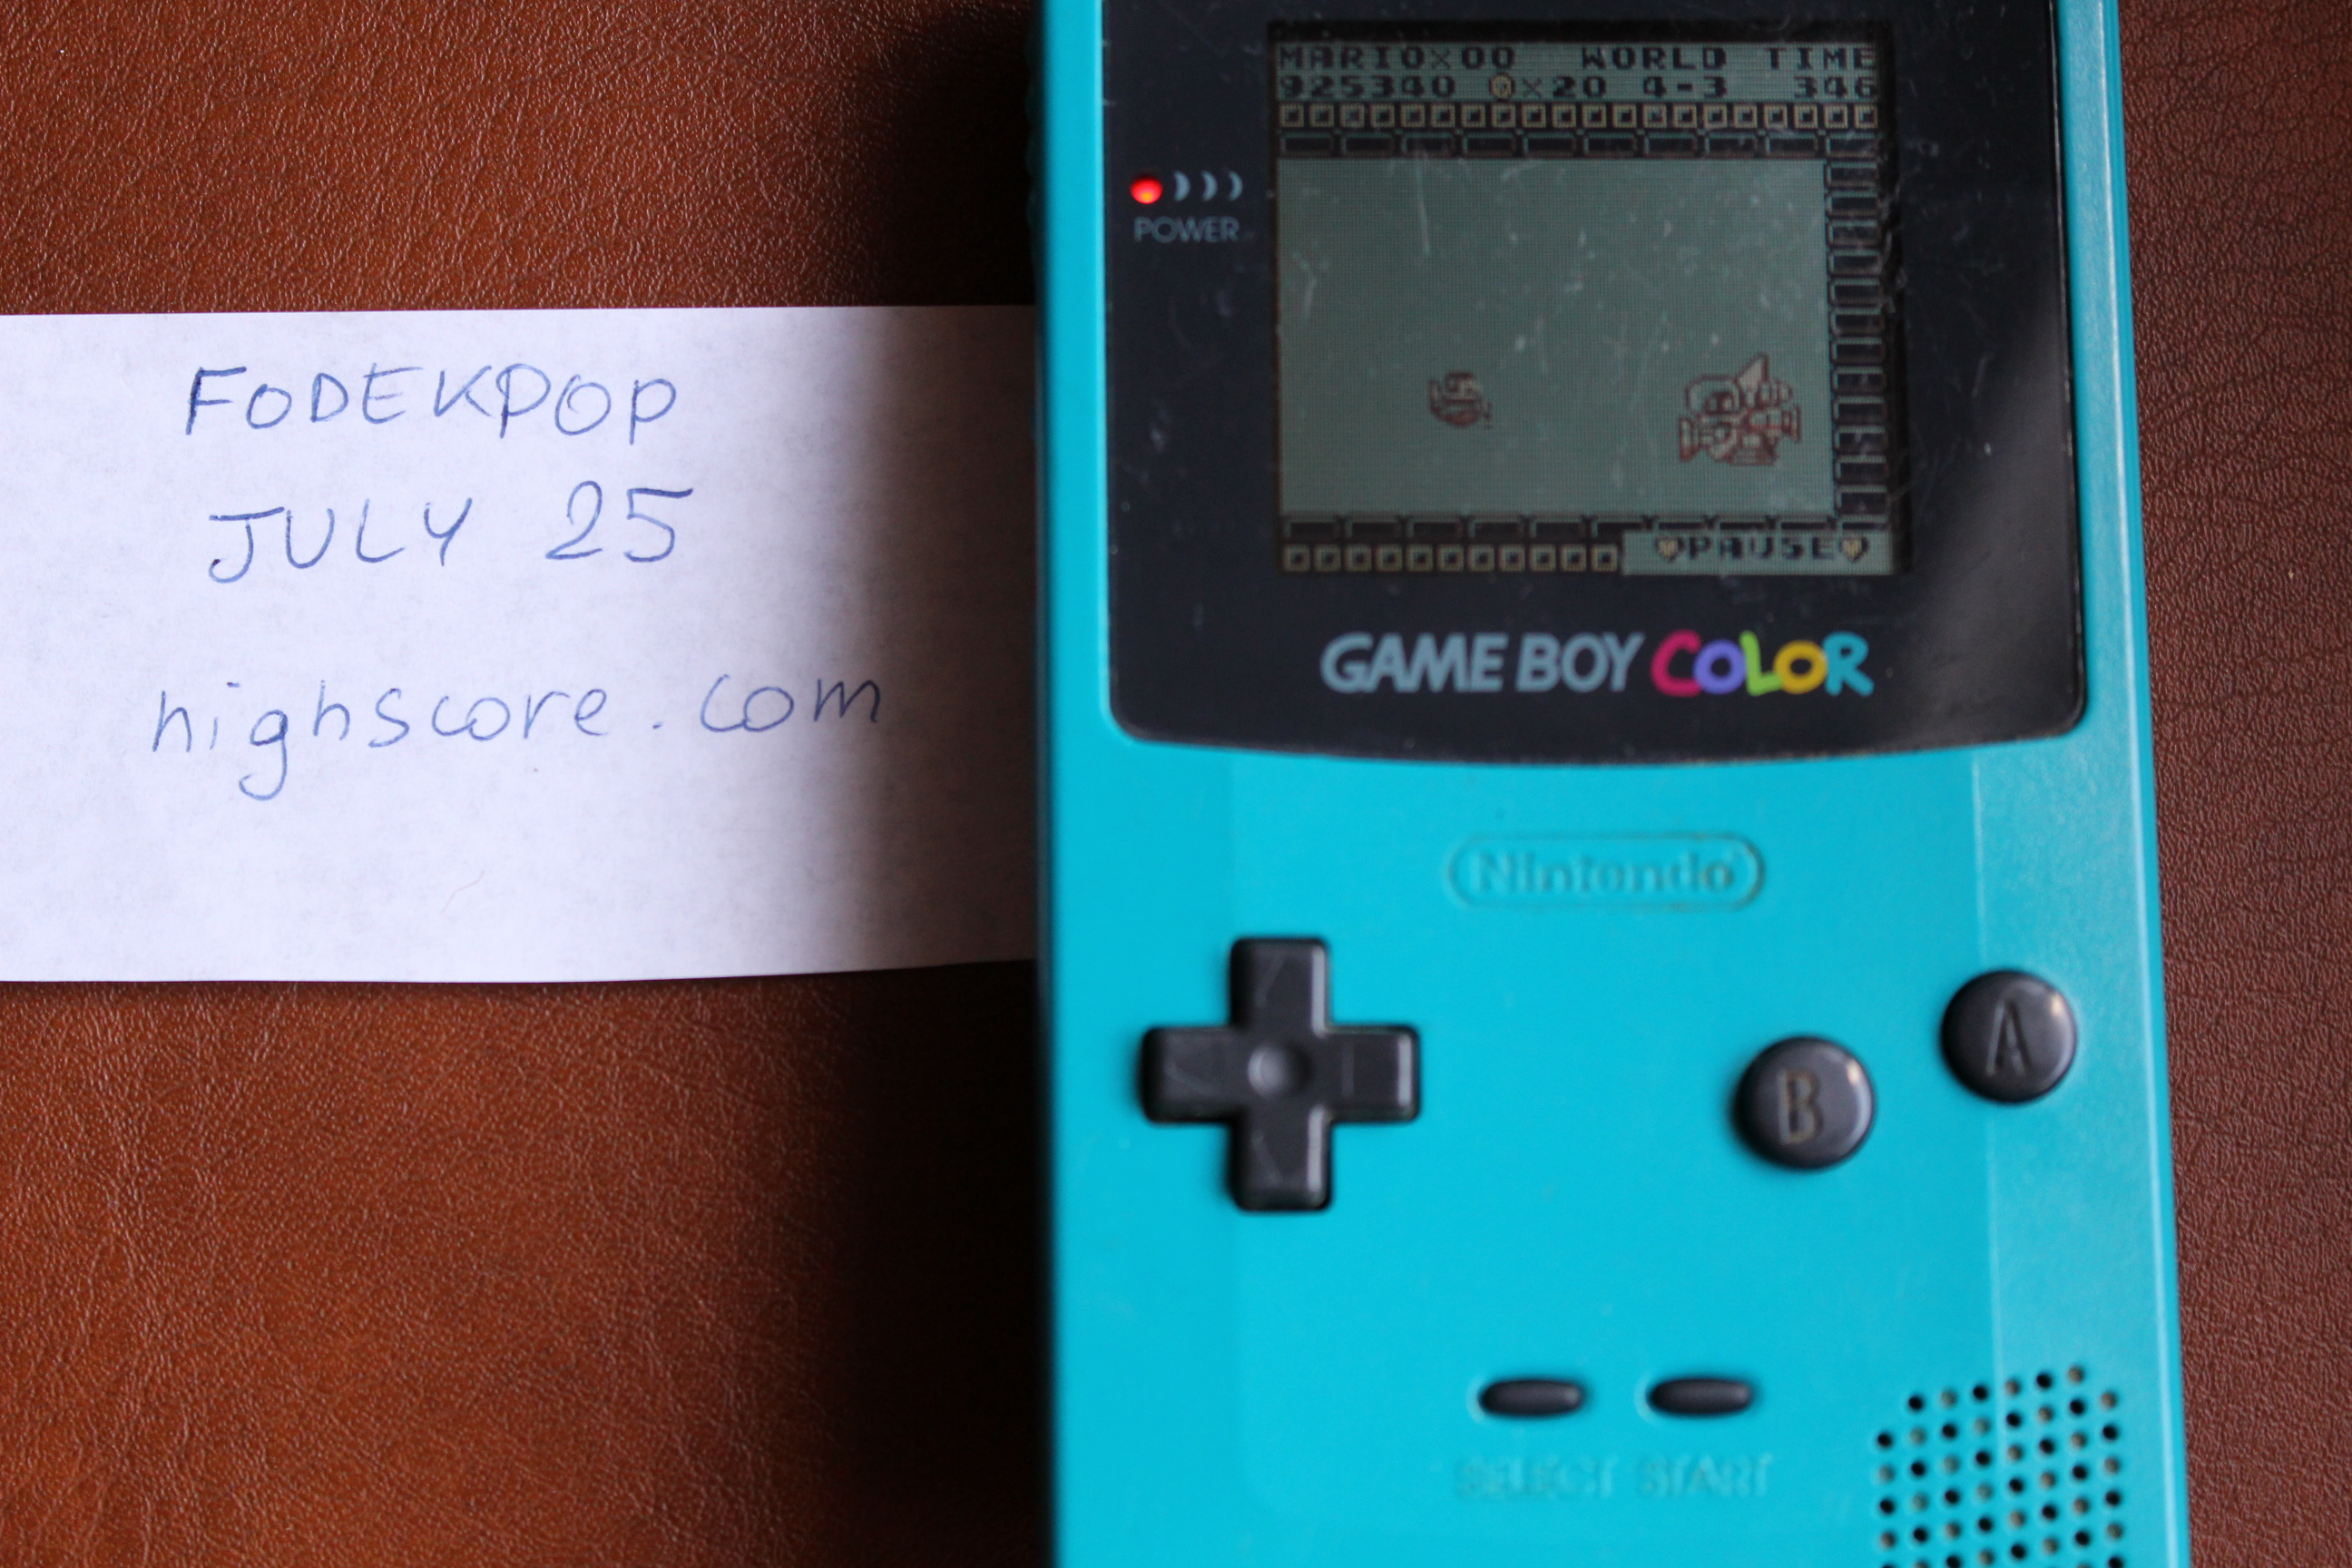 Fodekpop: Super Mario Land [Any Settings/Any Tactics] (Game Boy) 925,340 points on 2015-08-01 17:13:26